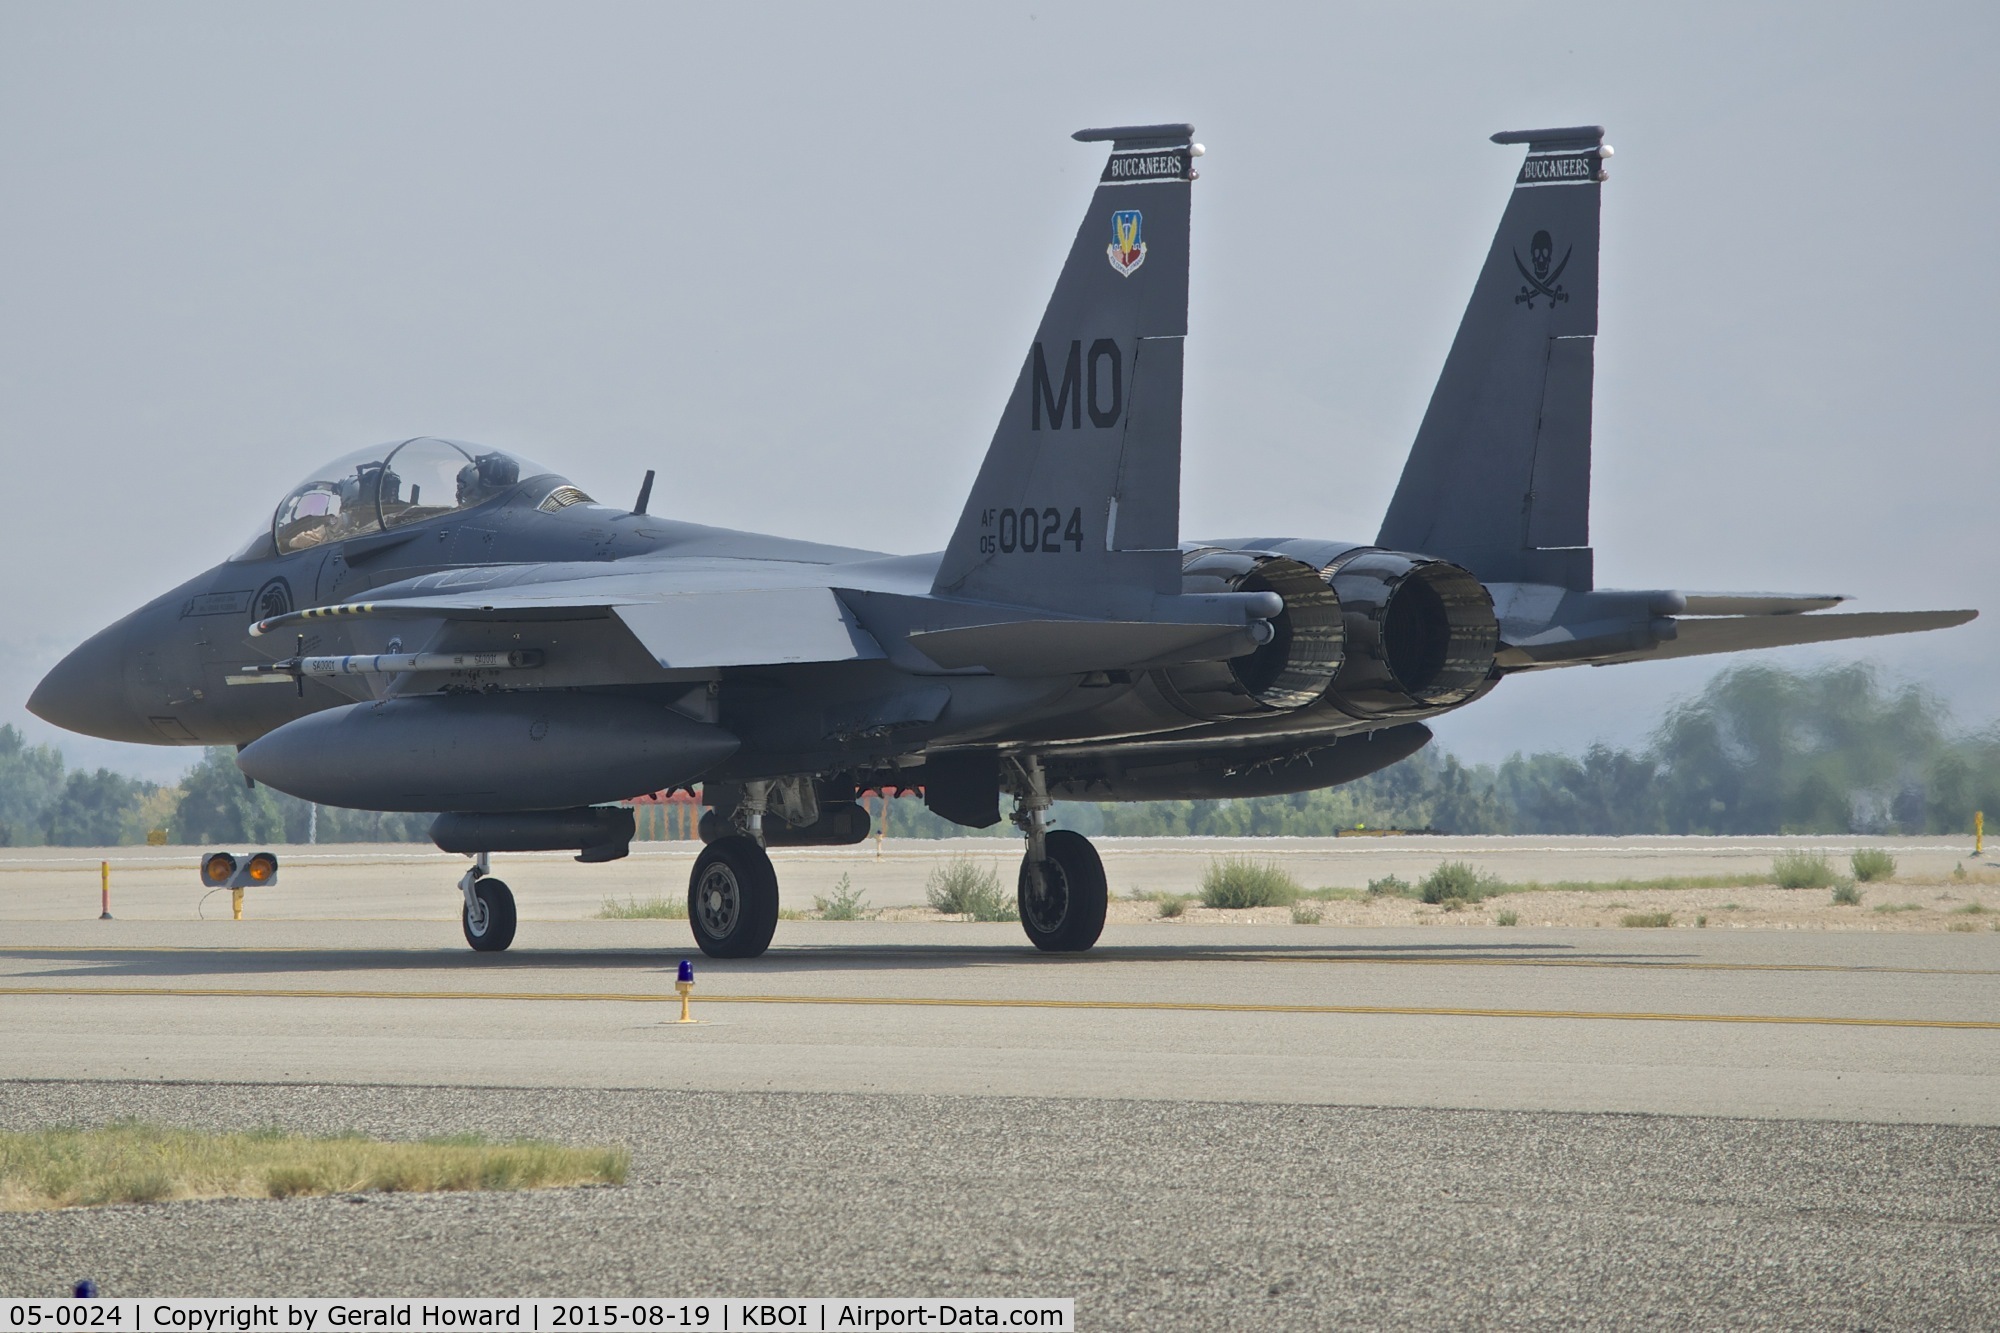 05-0024, 2005 Boeing F-15SG Strike Eagle C/N SG24, At the hold line for RWY 10R.  428th Fighter Sq. 